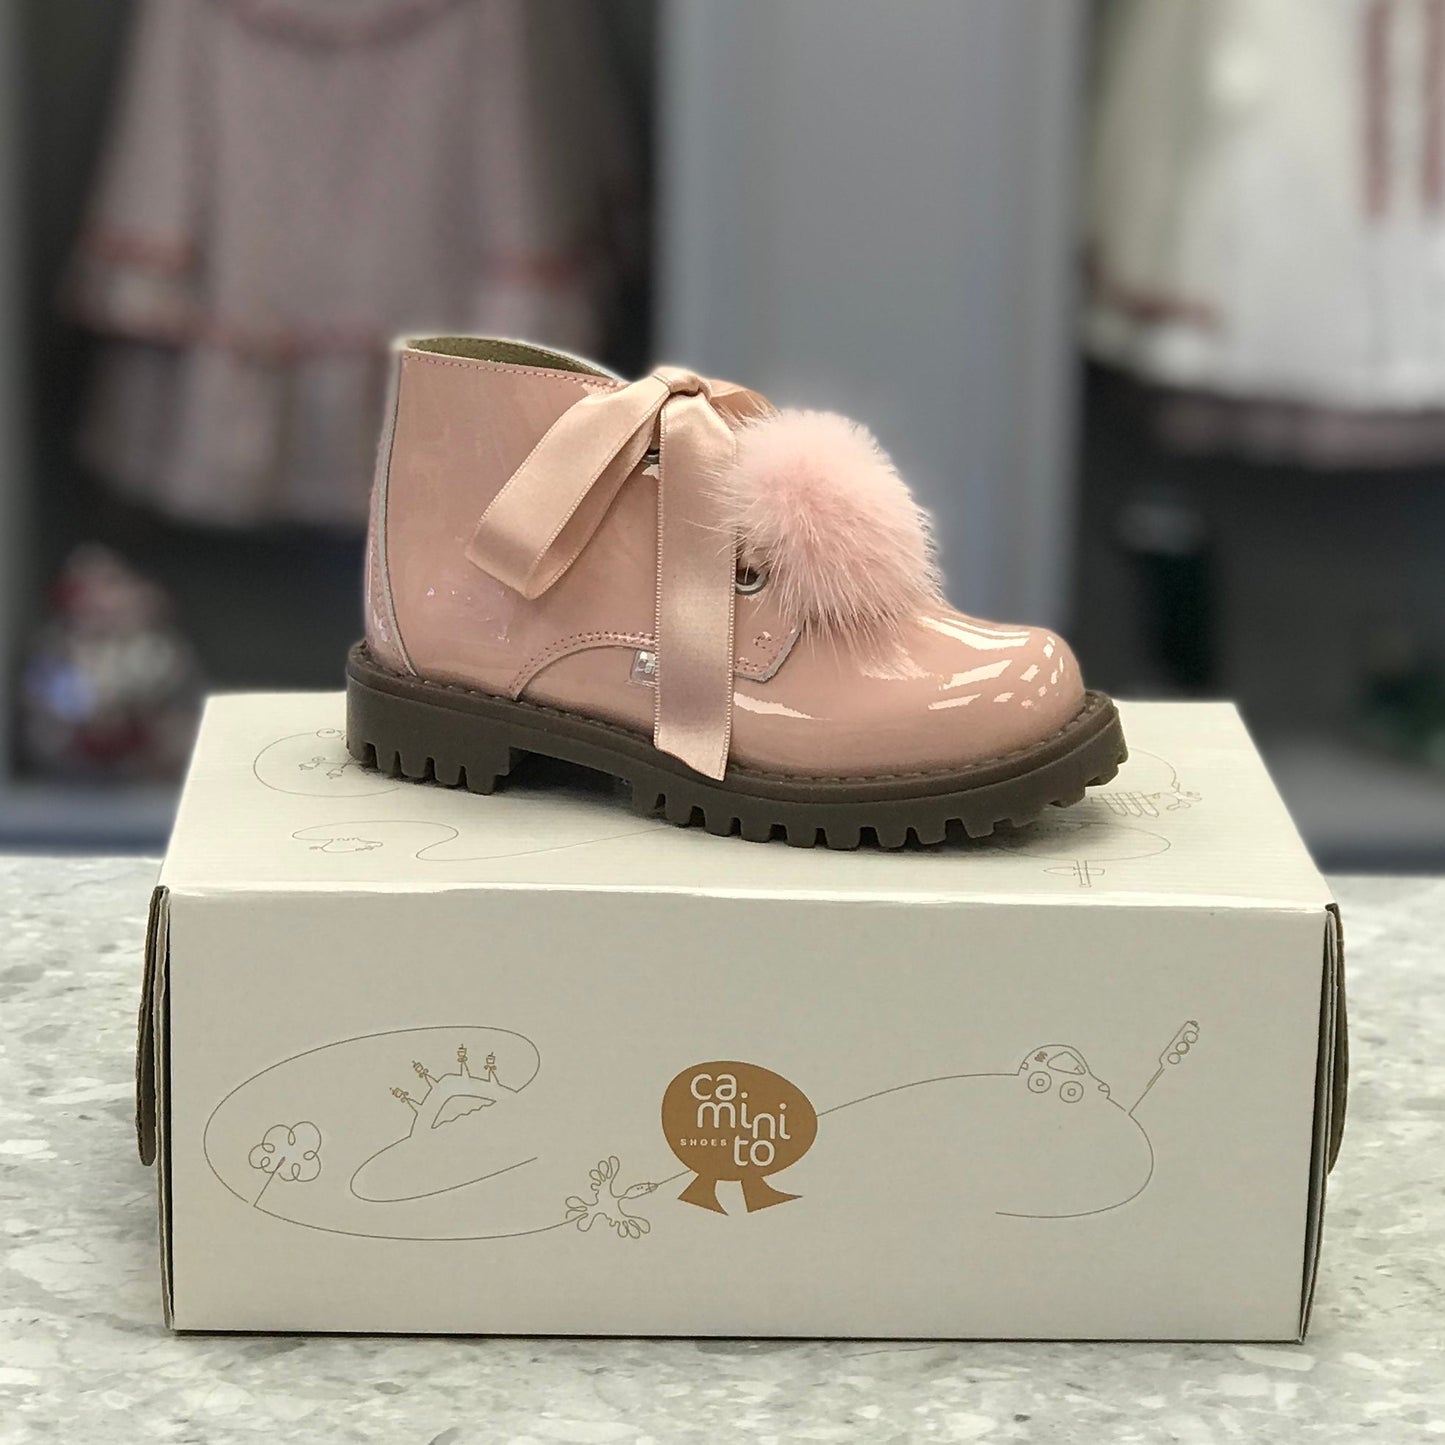 CAMINITO Pink Patent Leather Pom Pom Boots